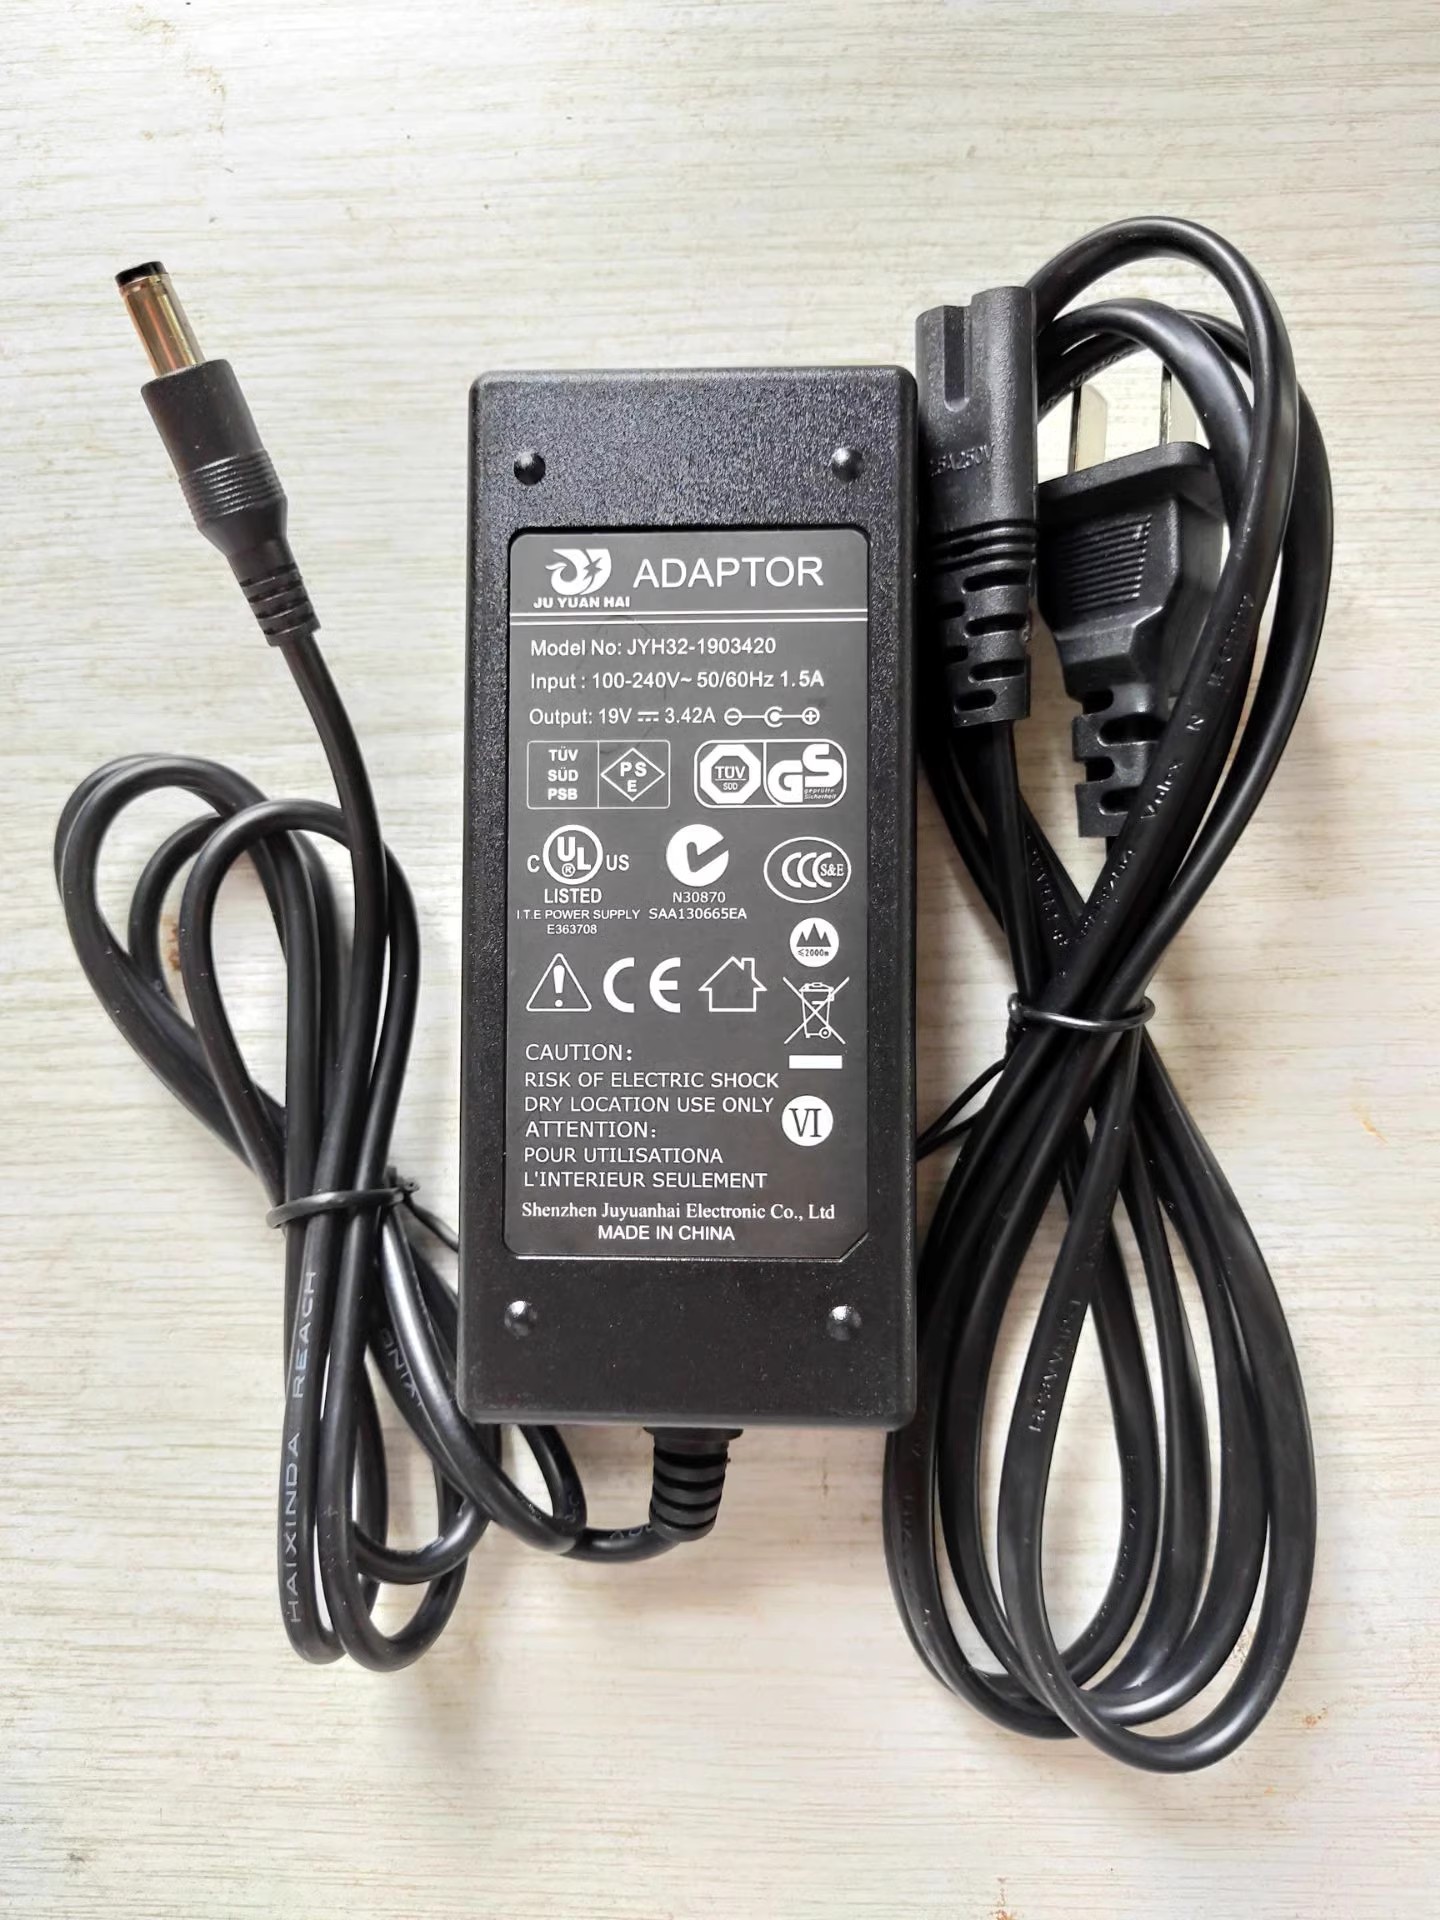 *Brand NEW* AC100-240V 50/60Hz JU YUAN HAI JYH32-1903420 19V 3.42A AC DC ADAPTHE POWER Supply - Click Image to Close